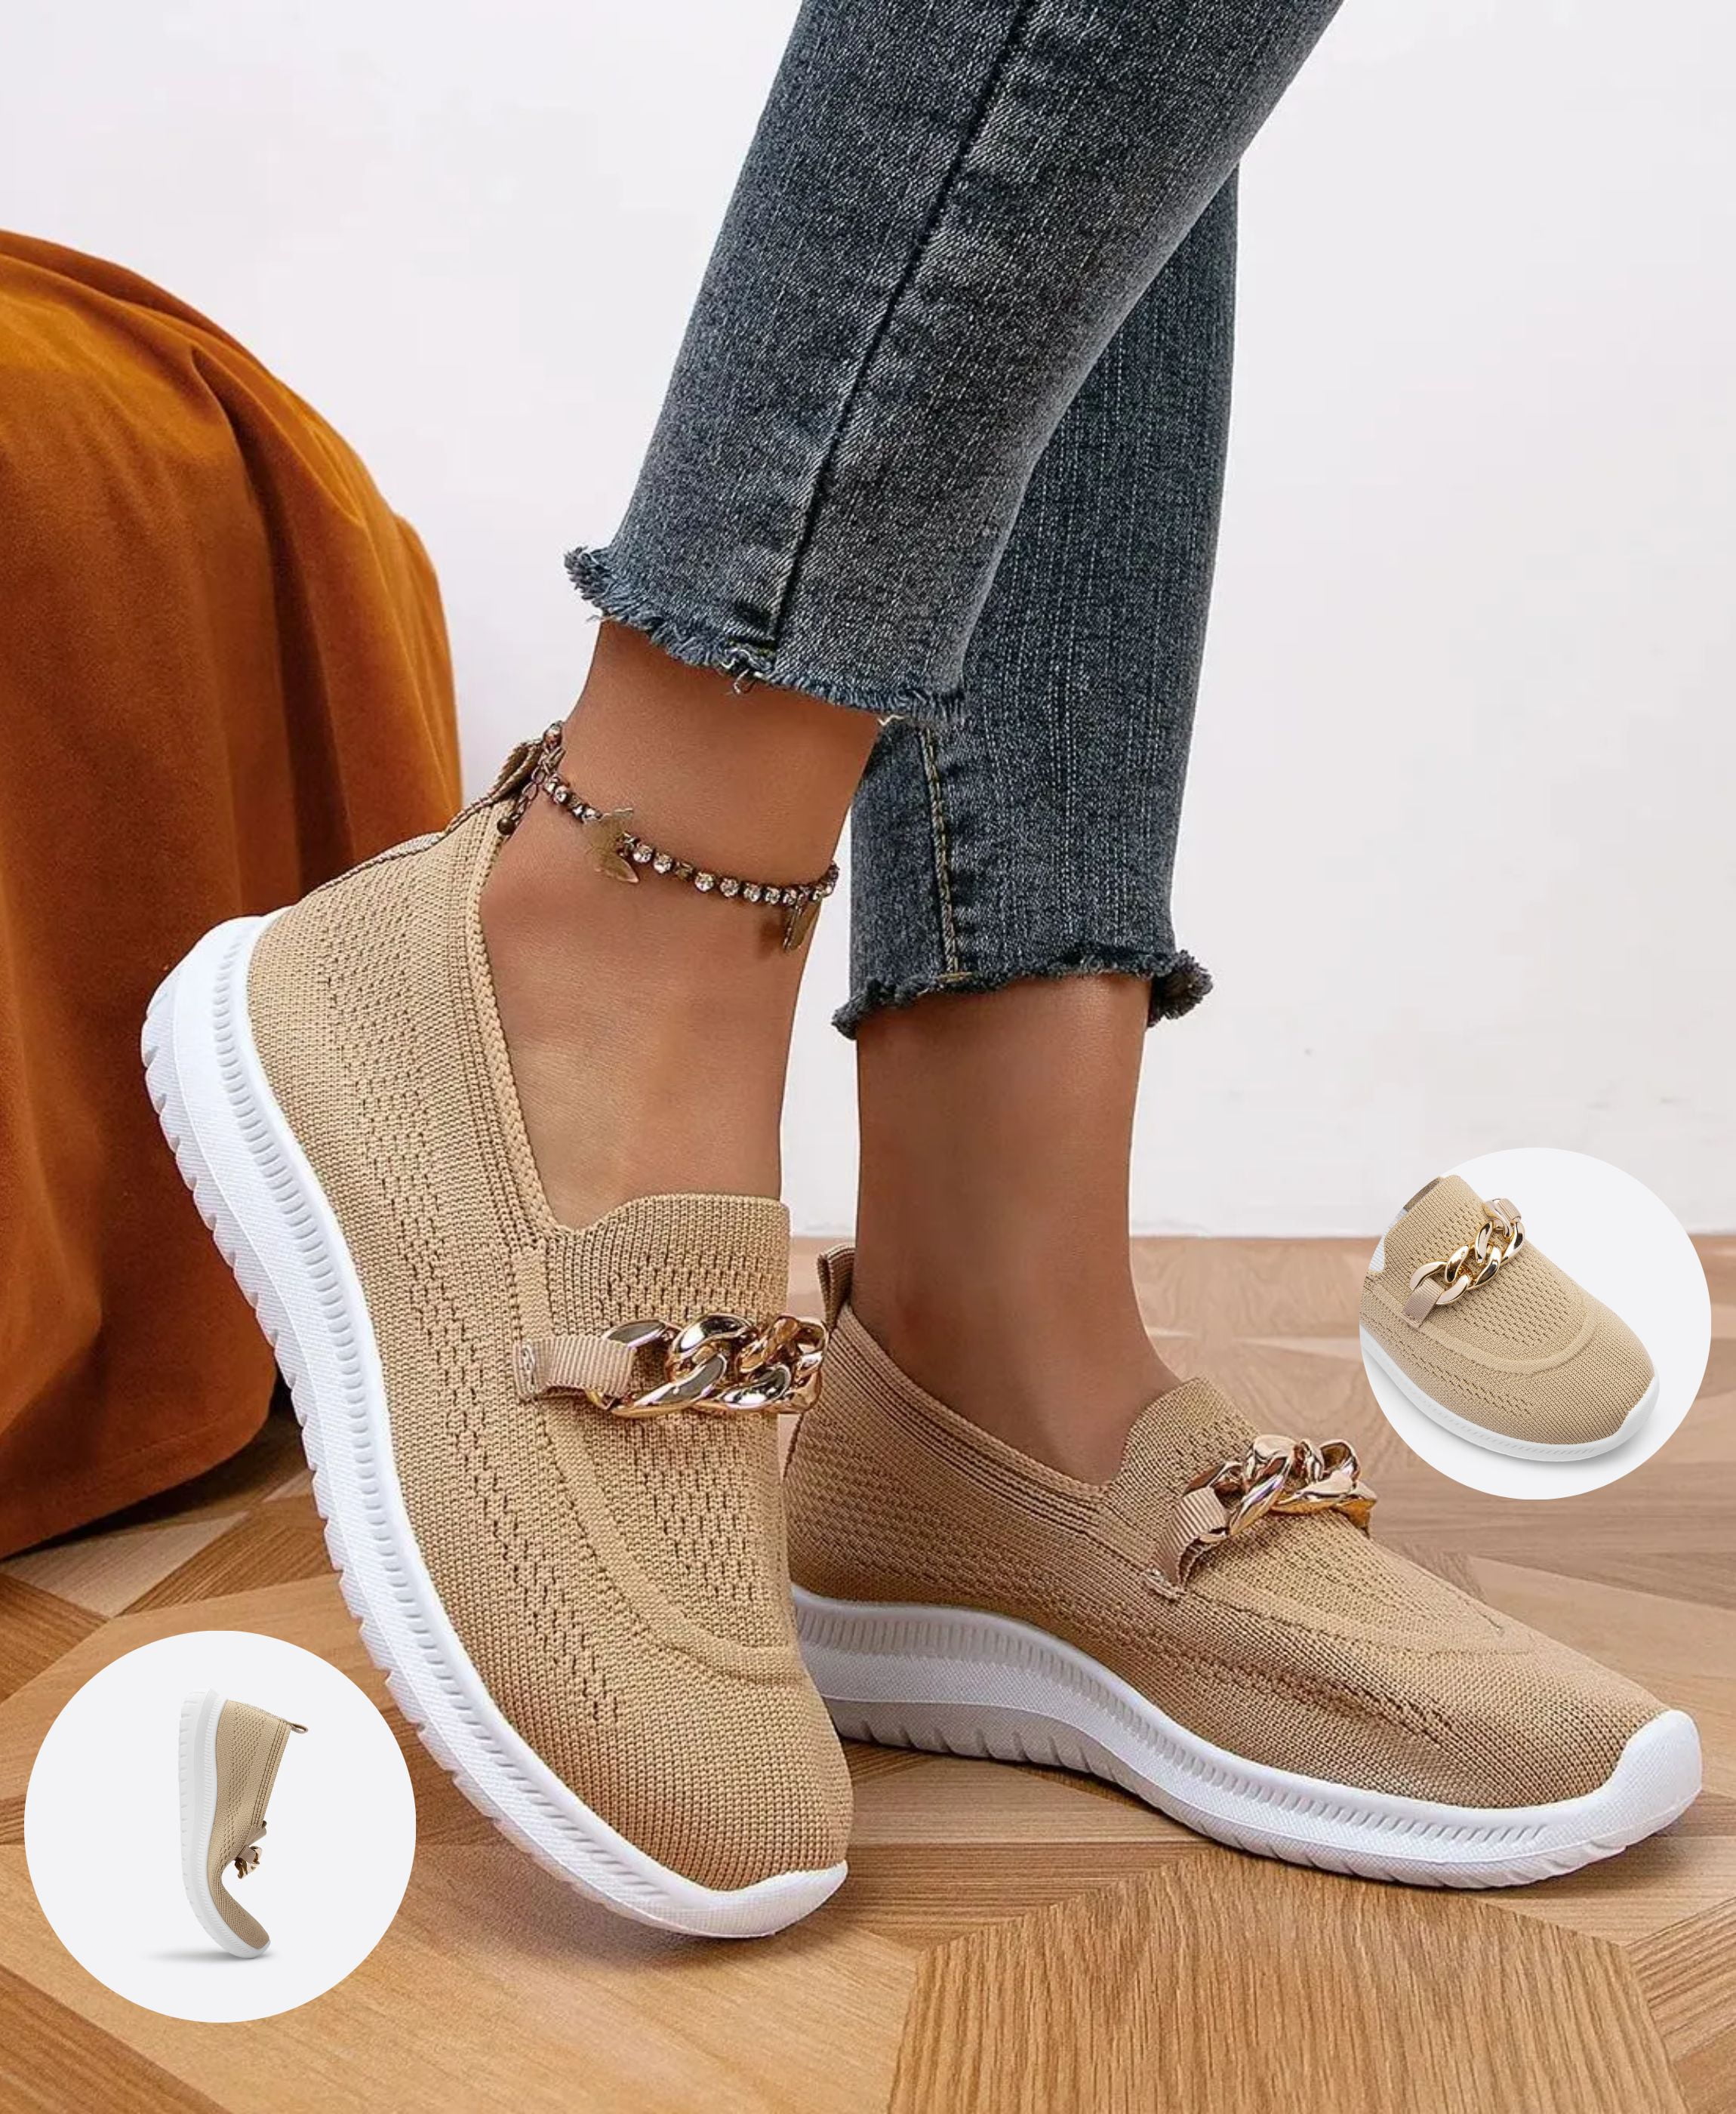 BERANMEY Metal Gold Chain Decor Slip-on Comfort Nurse Loafers Women Shoes Non Slip Shoes for Women Ladies Mesh Walking Fit Knit Breathable Shoes Dressy Casual Work Nursing Shoes